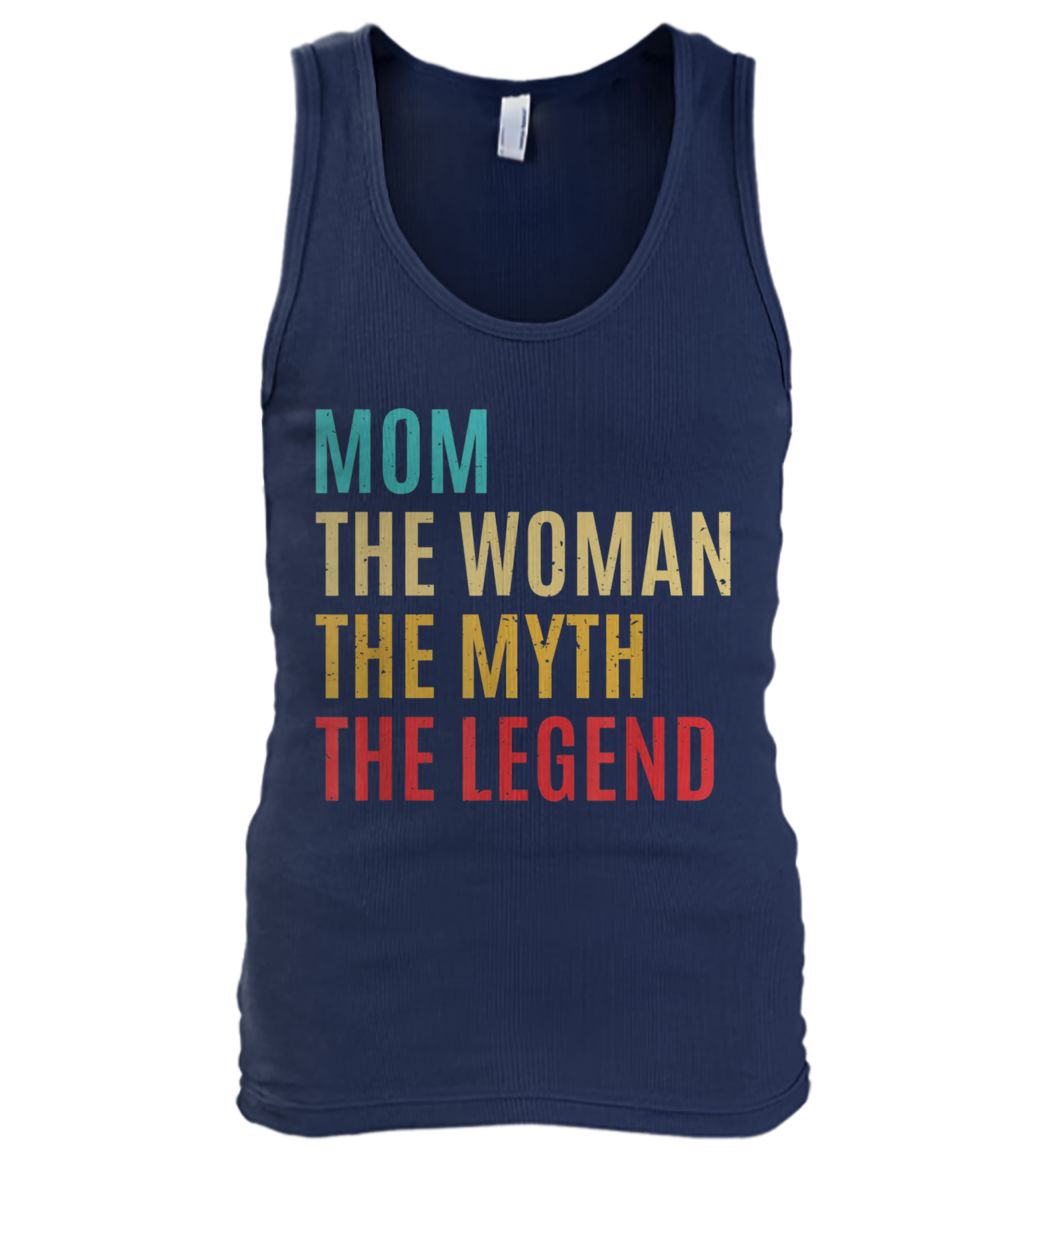 Vintage mom the woman the myth the legend mothers day men's tank top